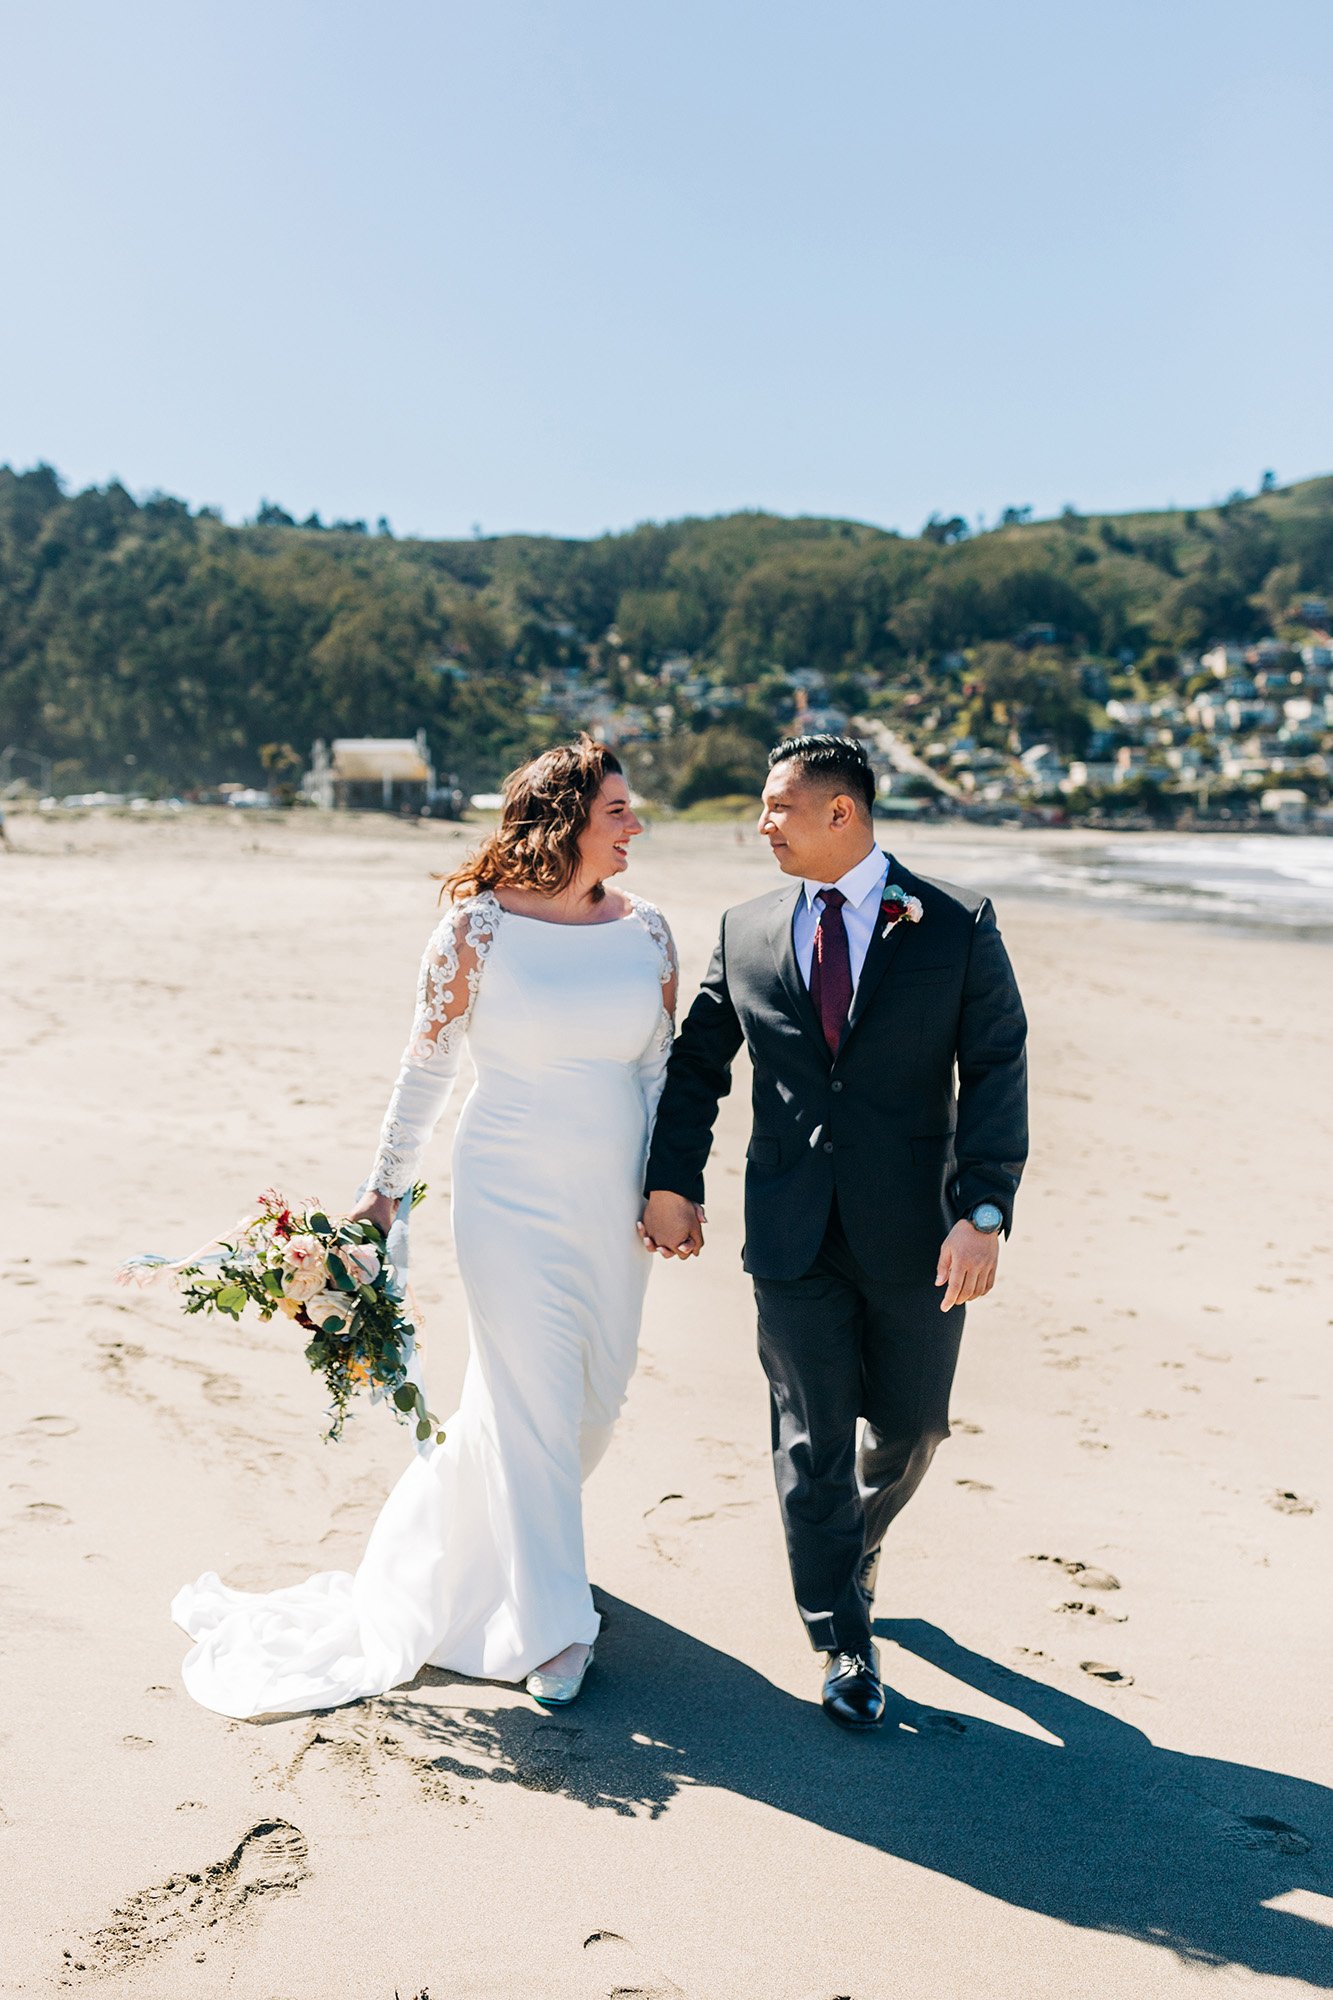 Ashley and Paul walk together on the beach in San Francisco, California